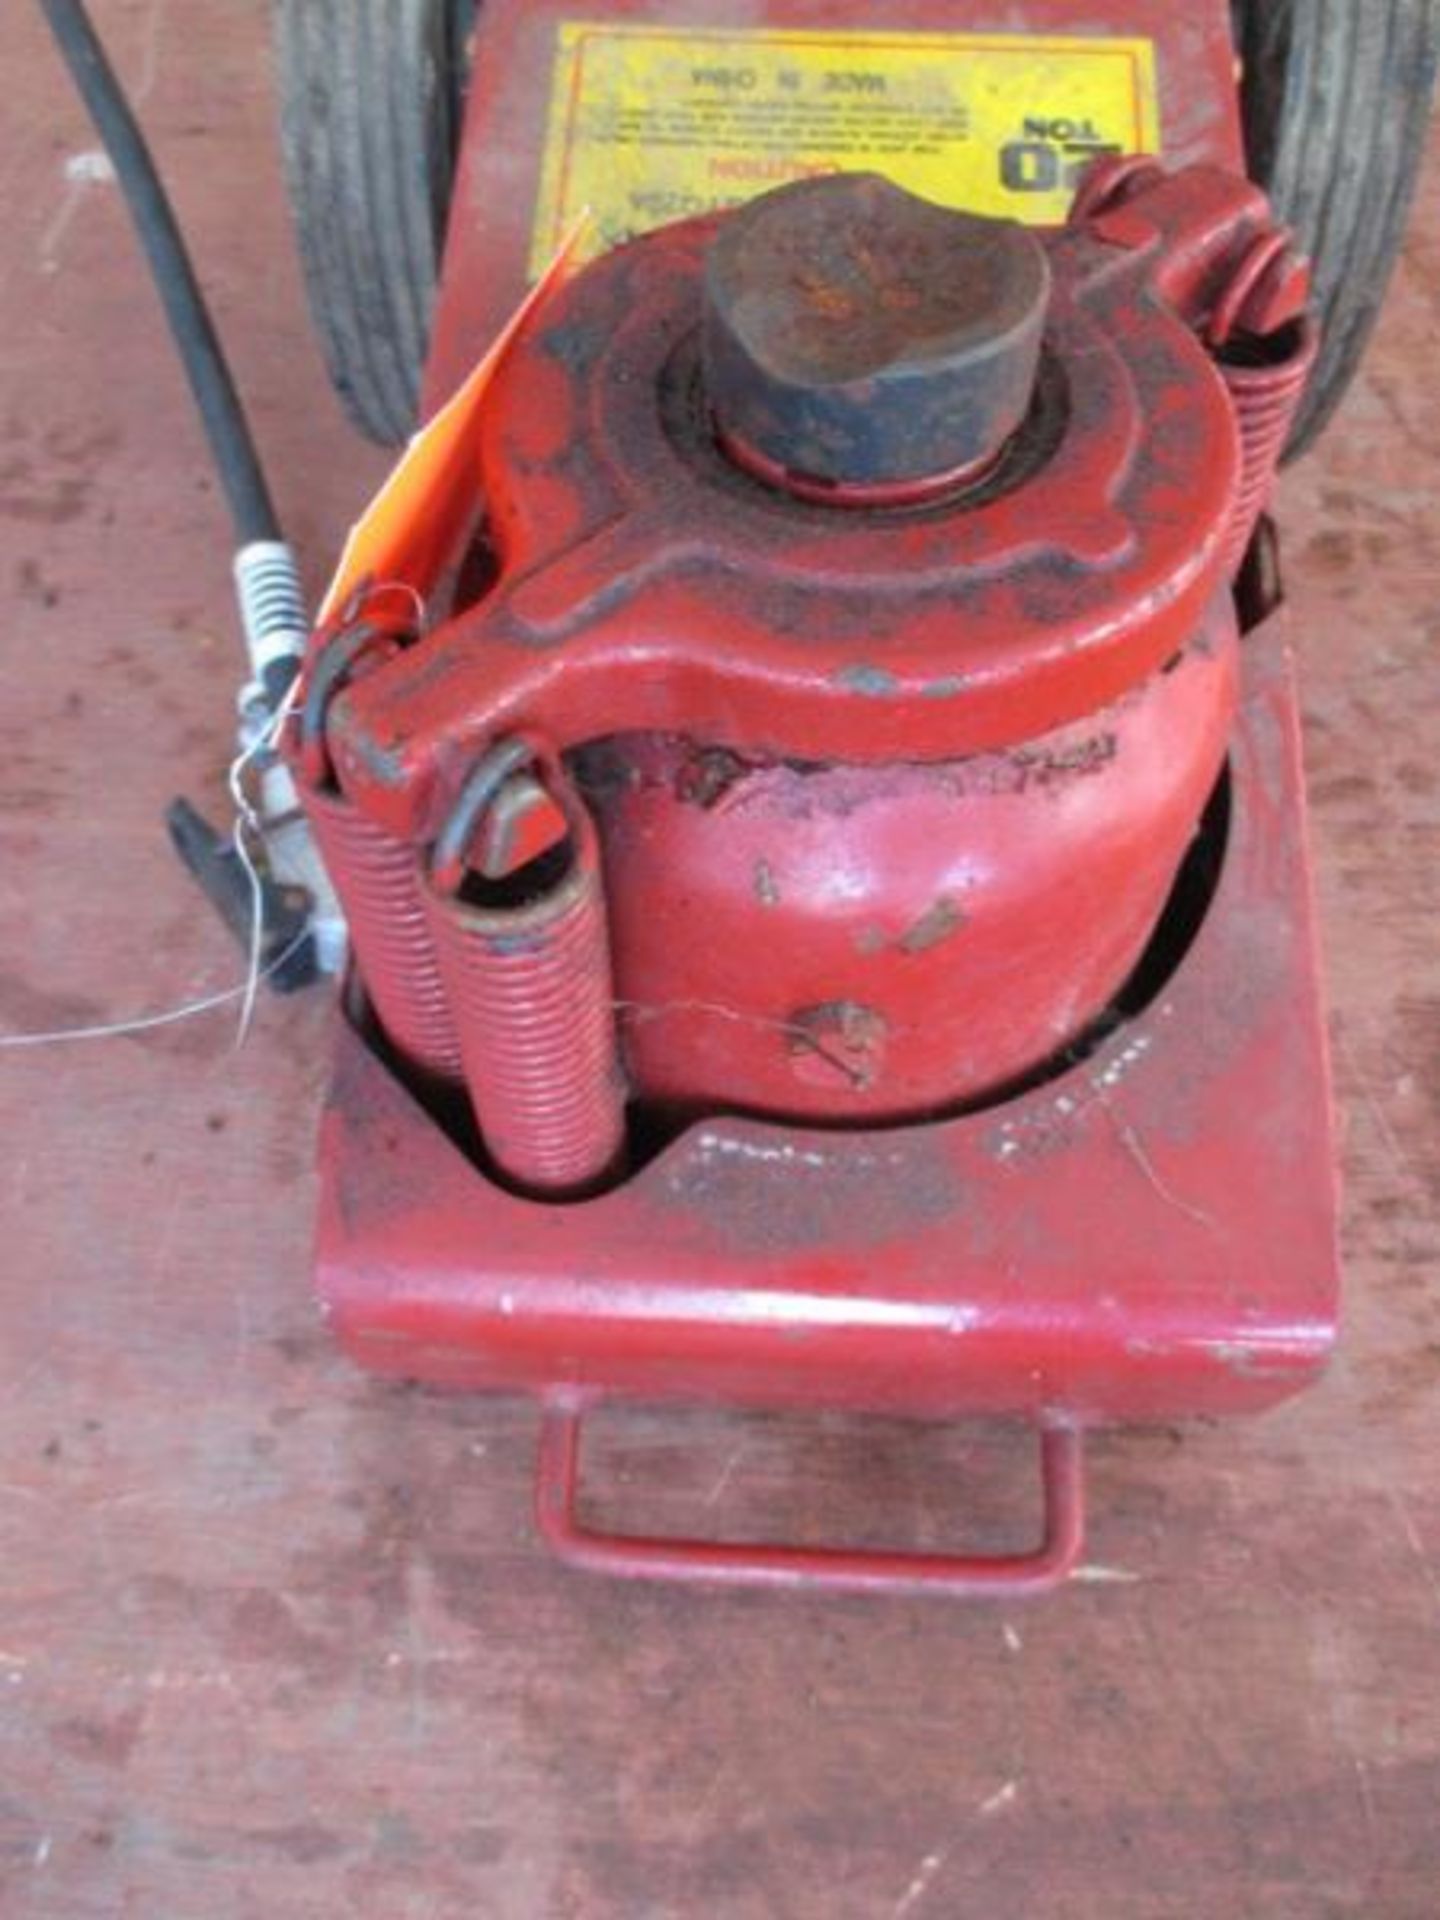 Hydraulic Air Jack, Model: QYQ20A, 20 Ton, Missing Handle Missing Handle - Image 11 of 13